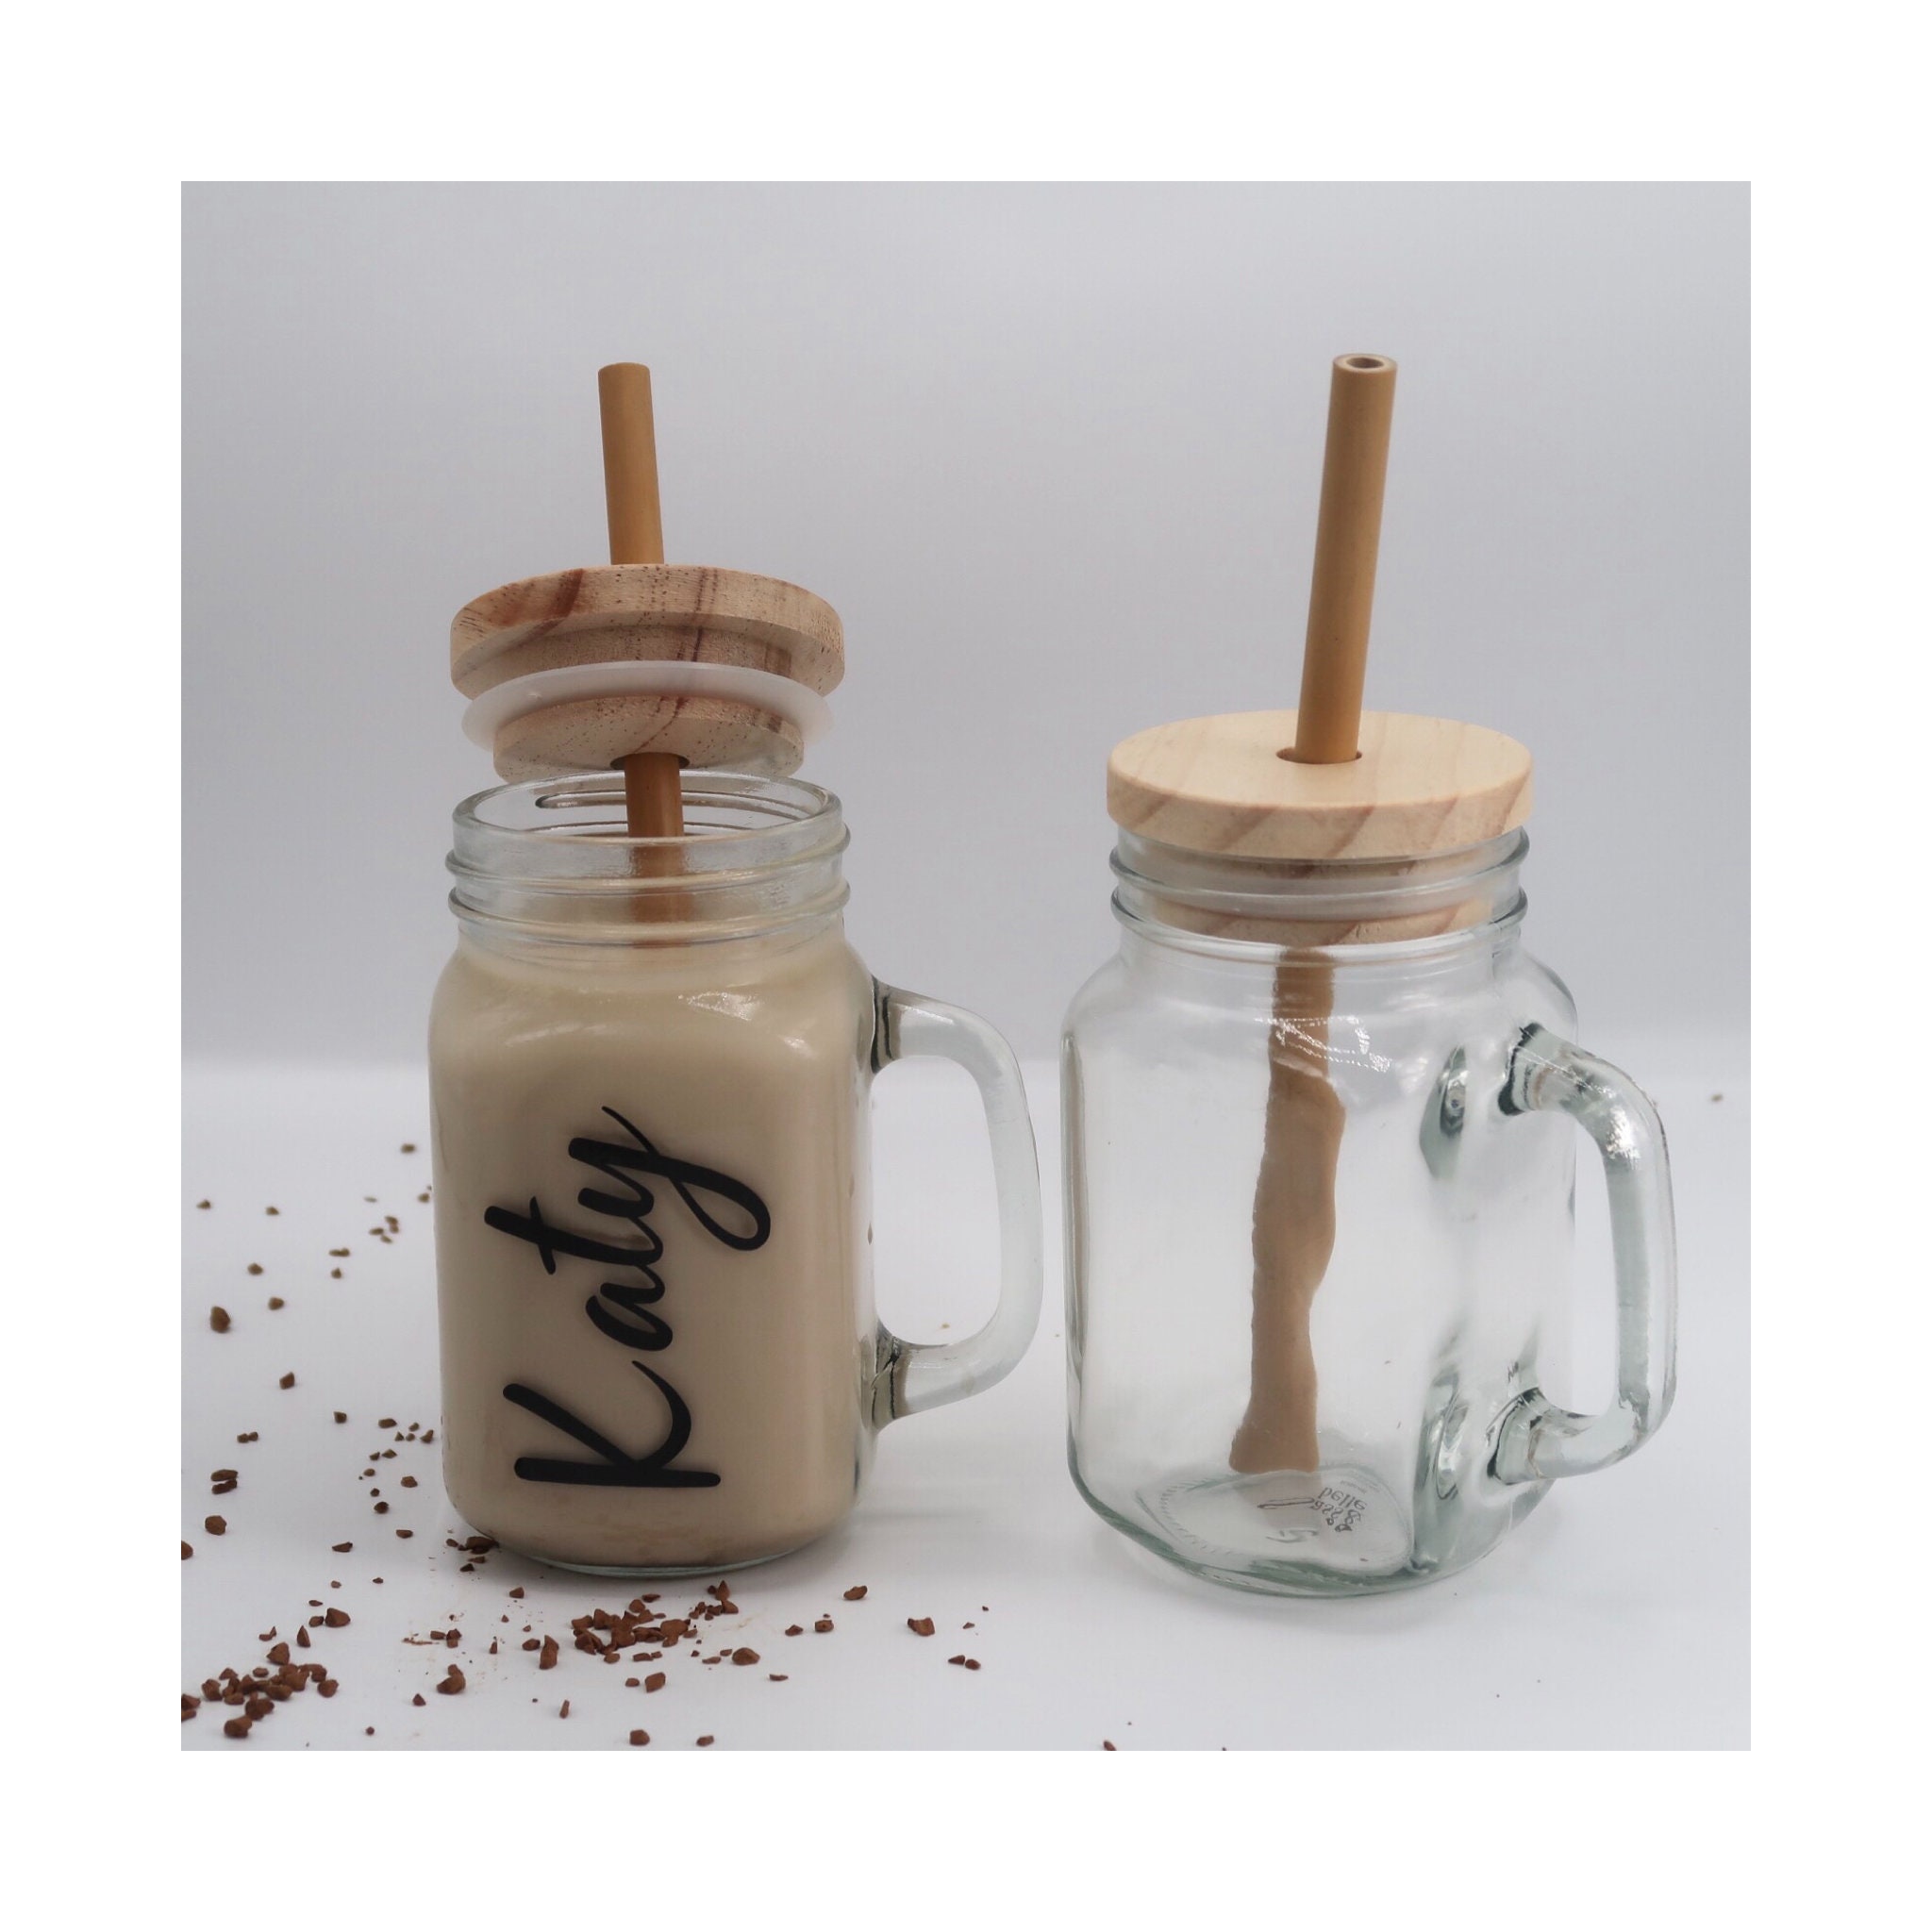 16oz Embossed Mason Jar Glasses With Lid, Straw, Handle, And Smoothie Glass  Bottle With Straw For Iced Coffee And Coffee From Longhuaglassware, $2.46